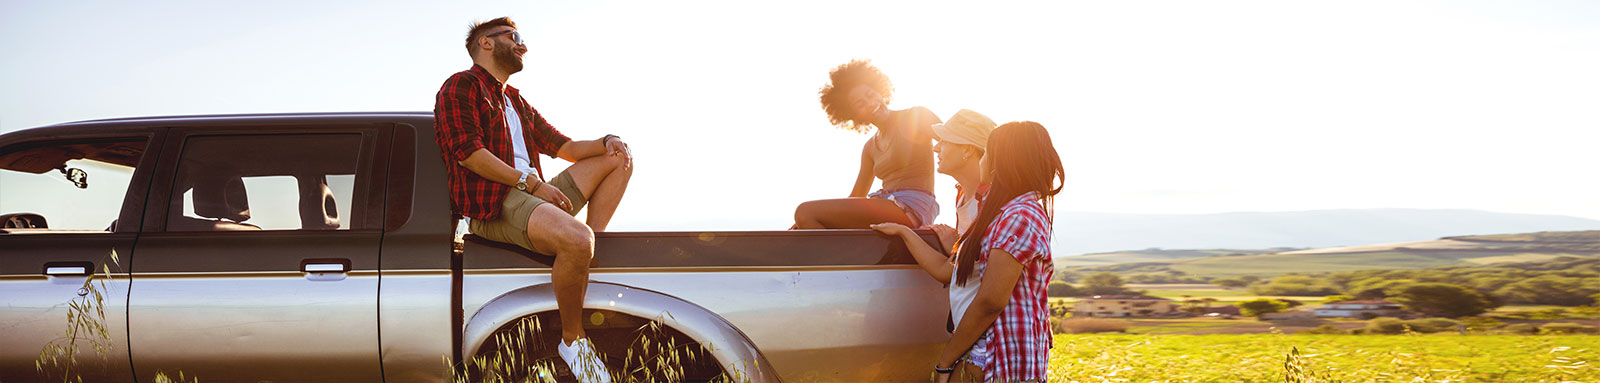 A group of young adults stand around a ute in a field